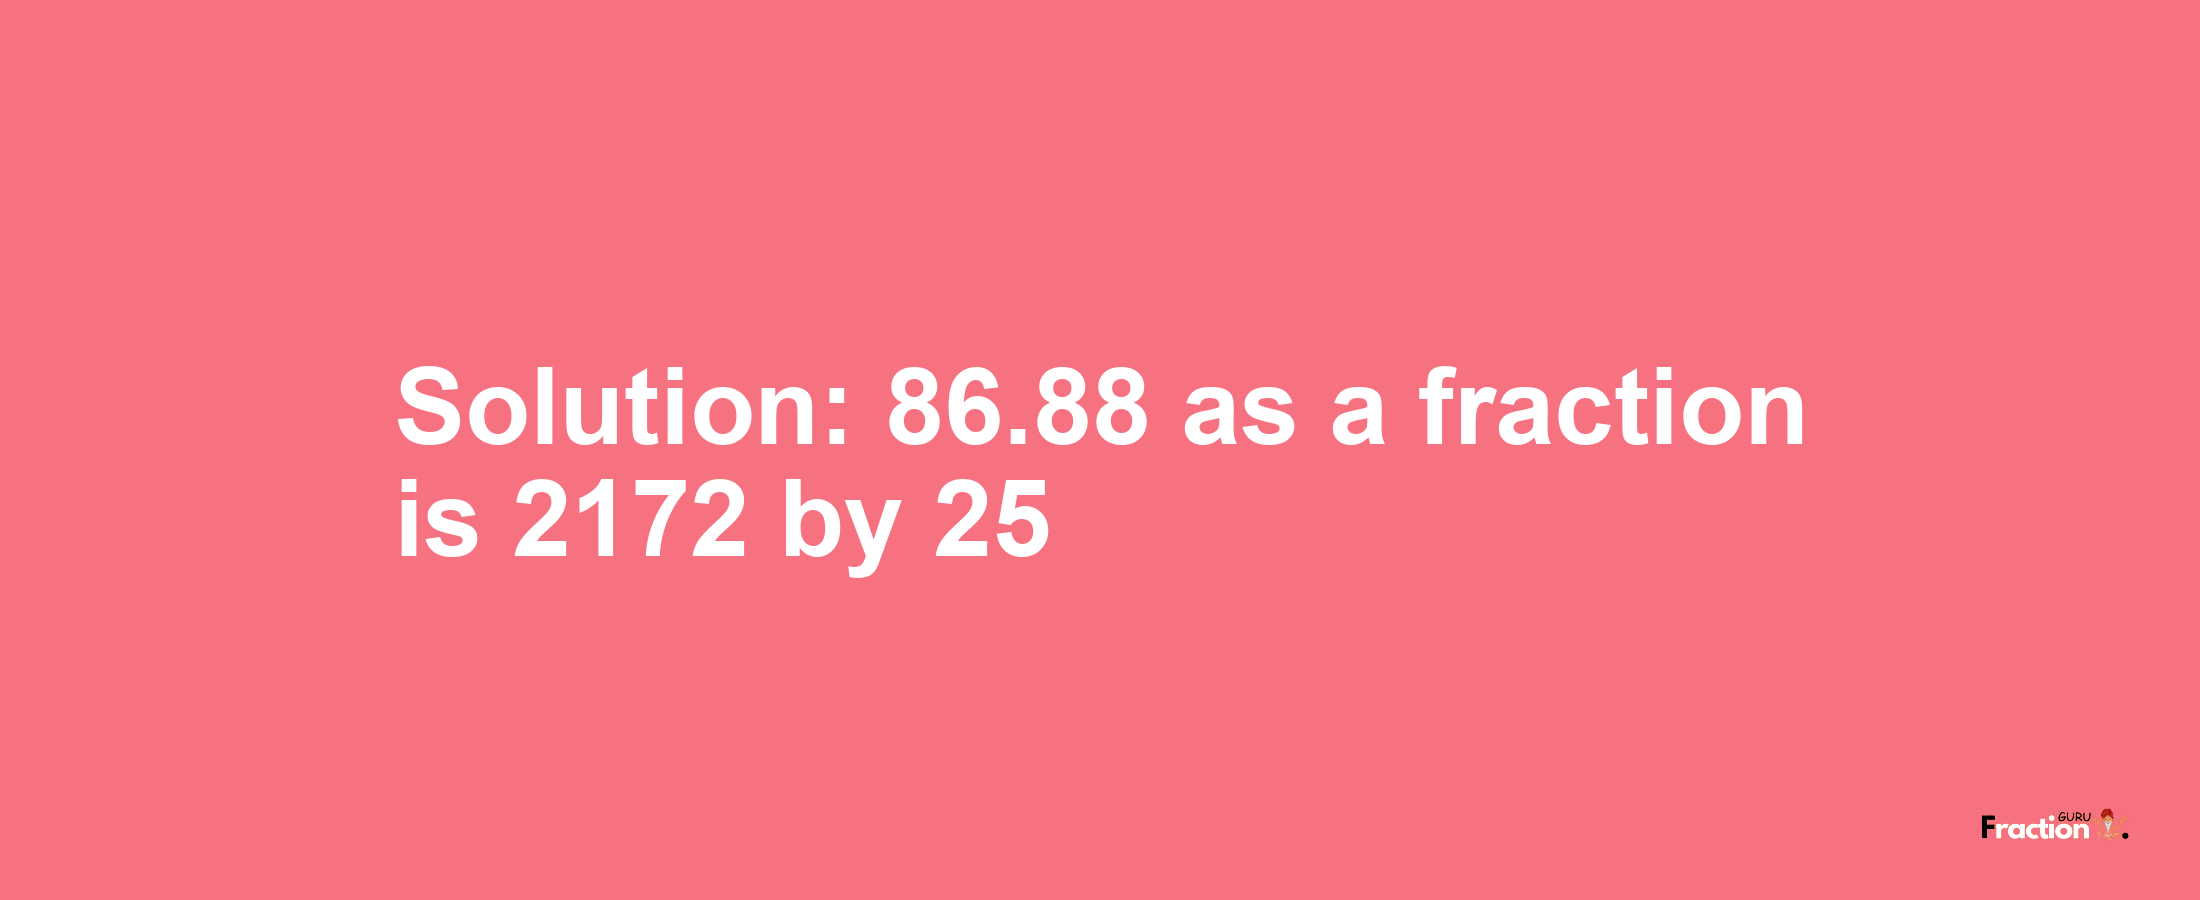 Solution:86.88 as a fraction is 2172/25